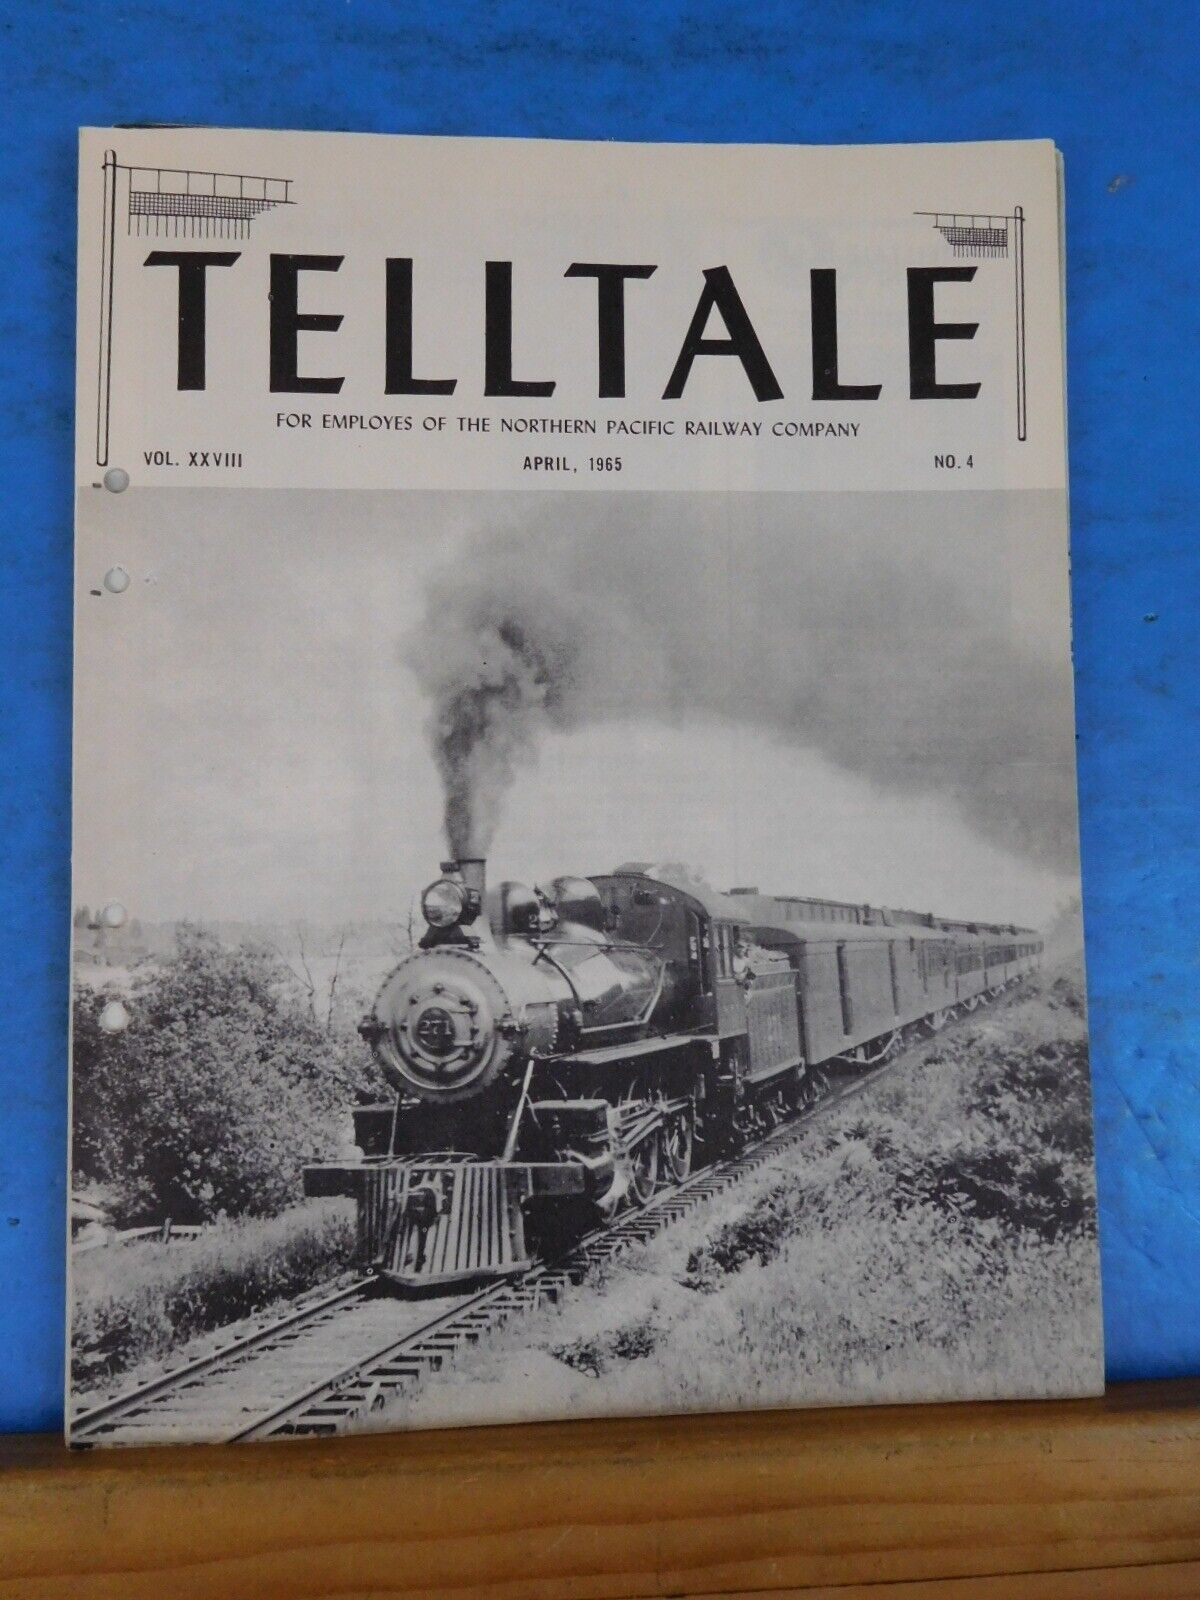 Tell Tale 1965 April Northern Pacific Employee Magazine Telltale